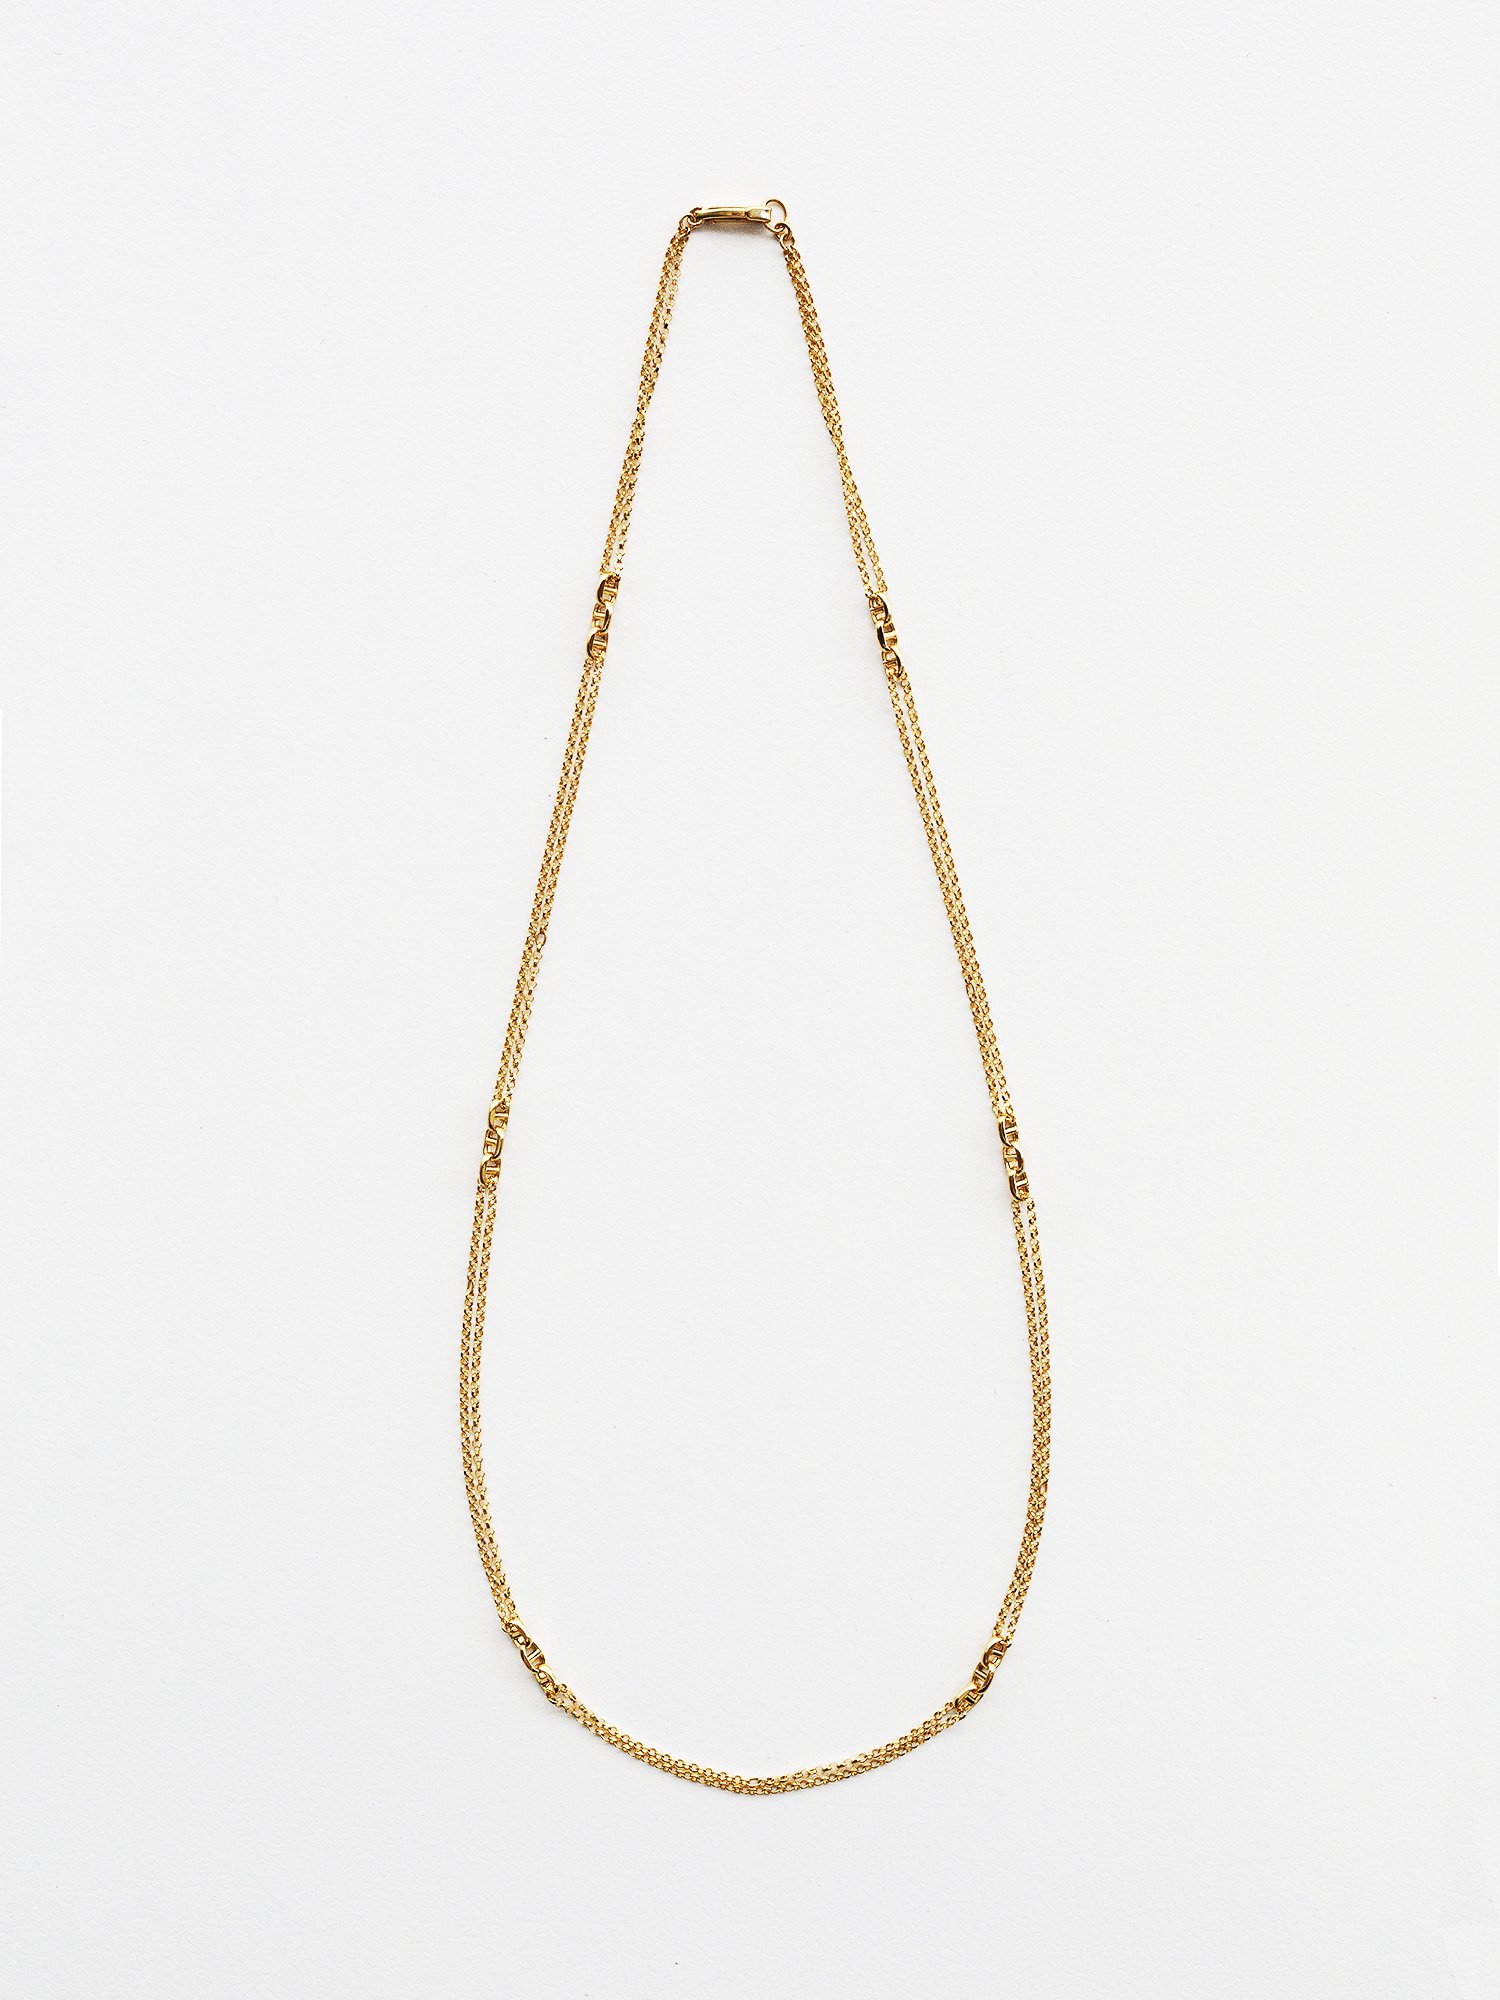 ALCHYMIA / Anchor station necklace ( Double)
